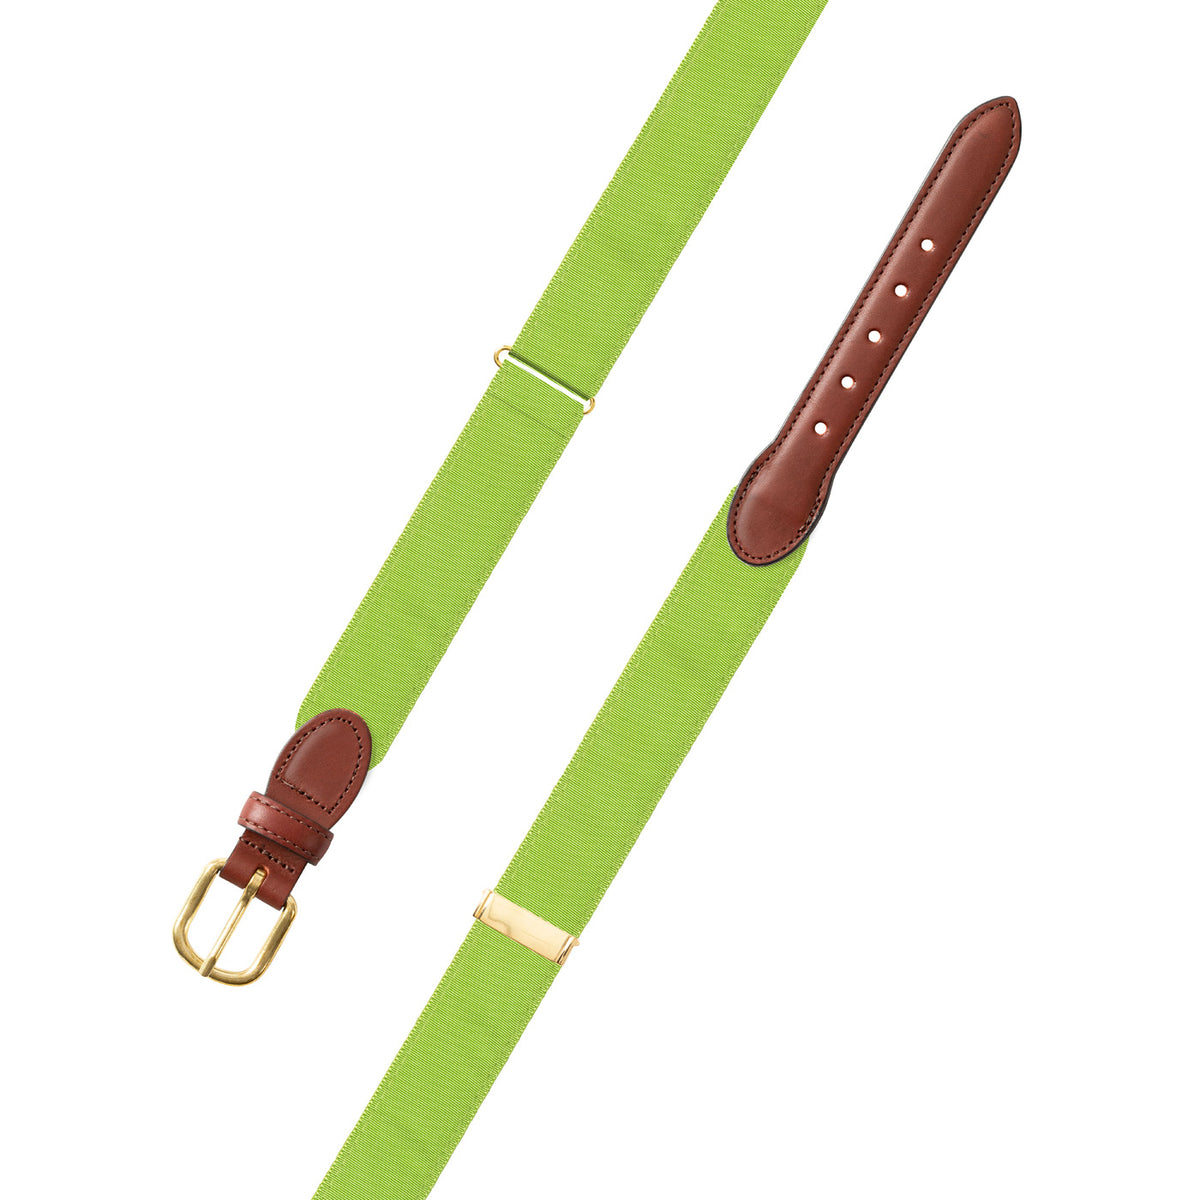 Adjustable Grass Green Grosgrain Belt with Brown Leather Tabs